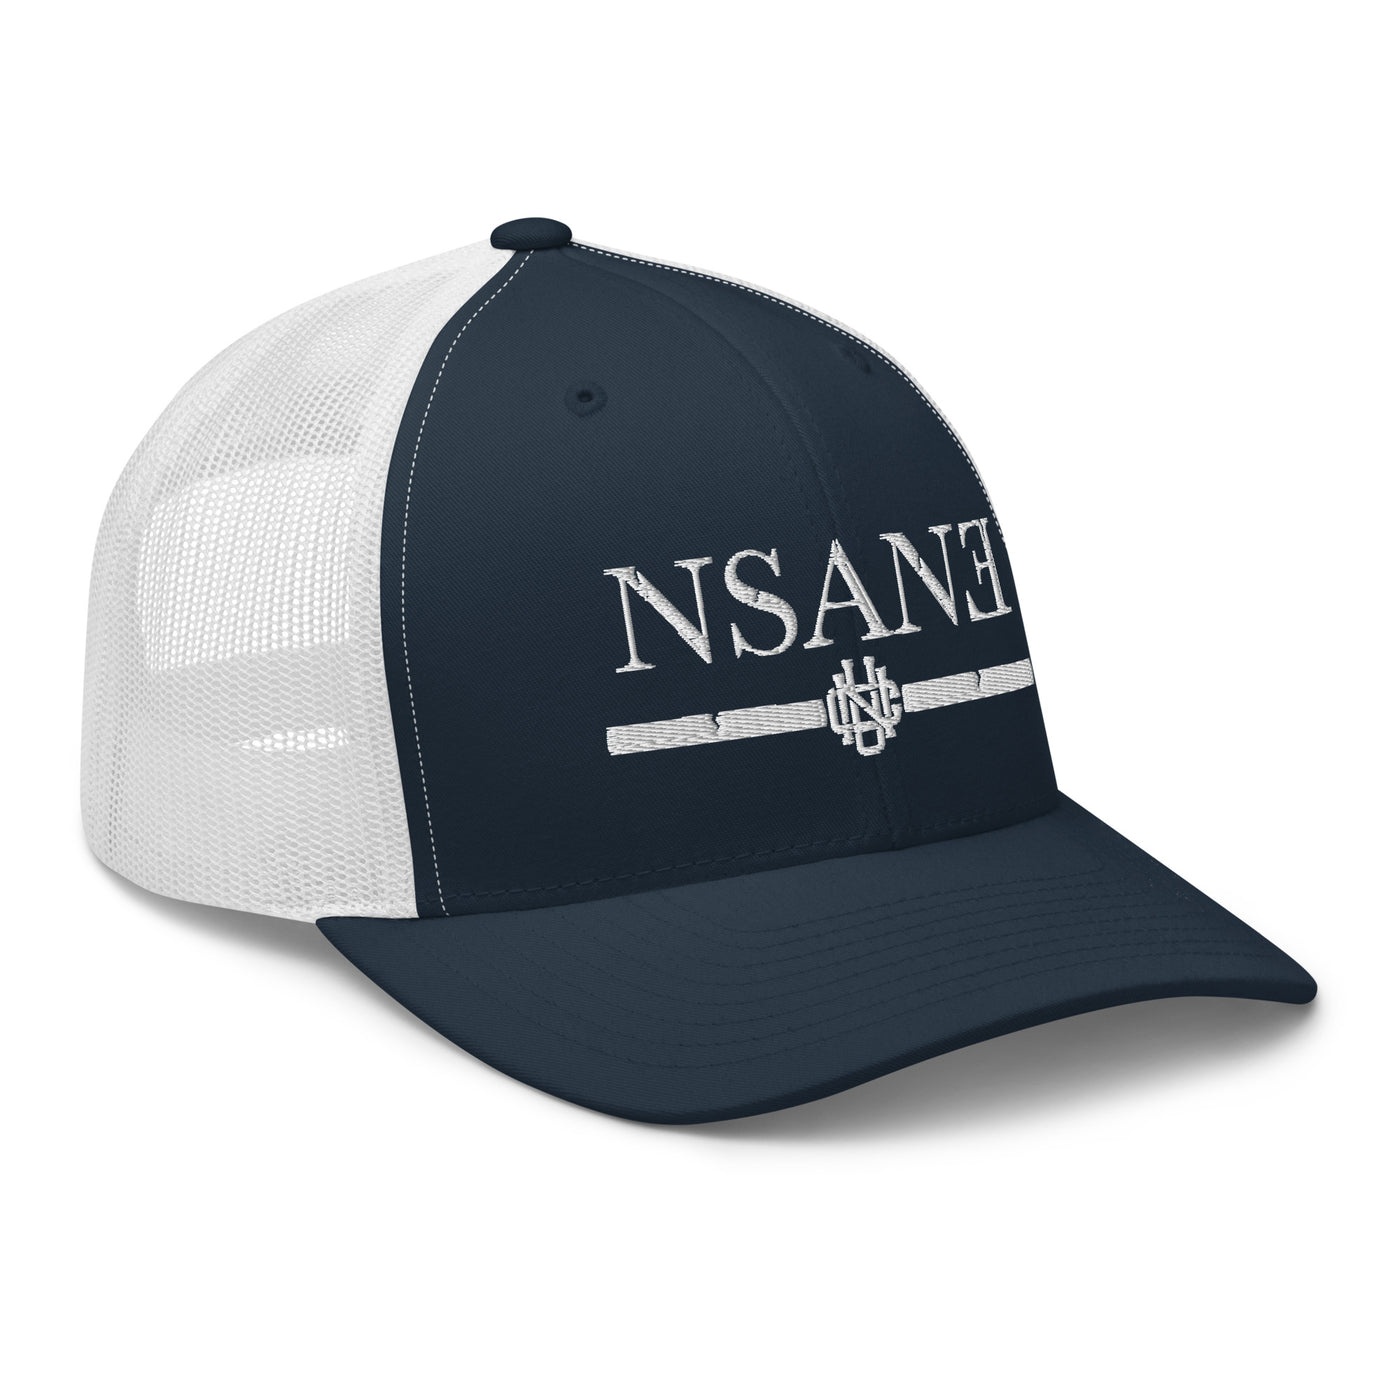 Nsane Signature Trucker - Unique Sweatsuits, hats, tees, shorts, hoodies, Outwear & accessories online | Uneekly Nsane